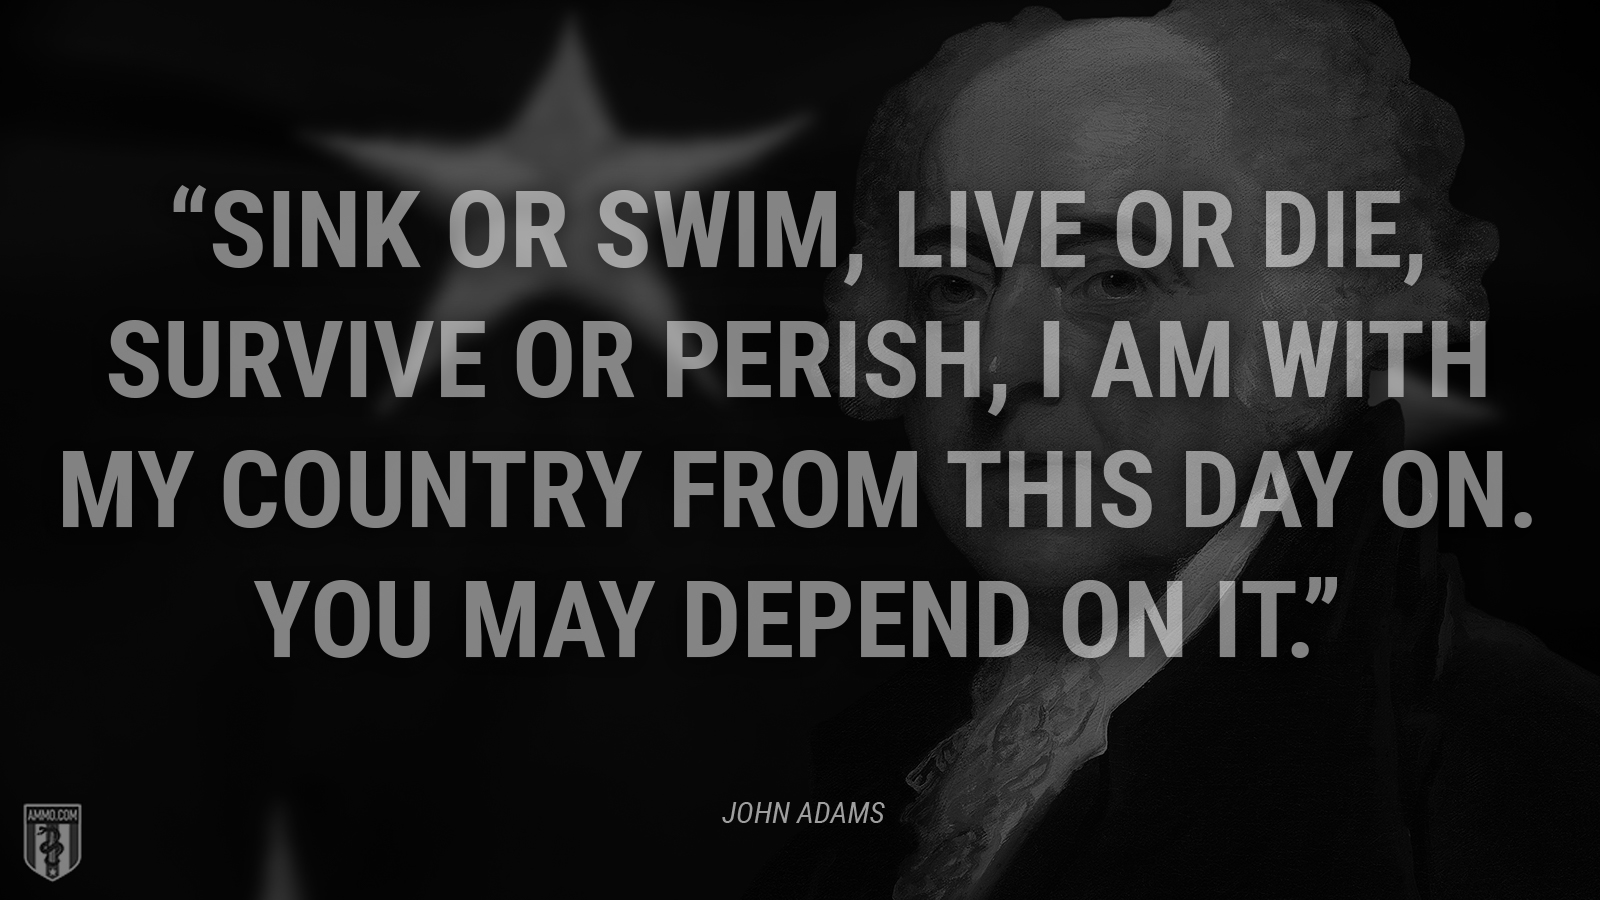 “Sink or swim, live or die, survive or perish, I am with my country from this day on. You may depend on it.” - John Adams